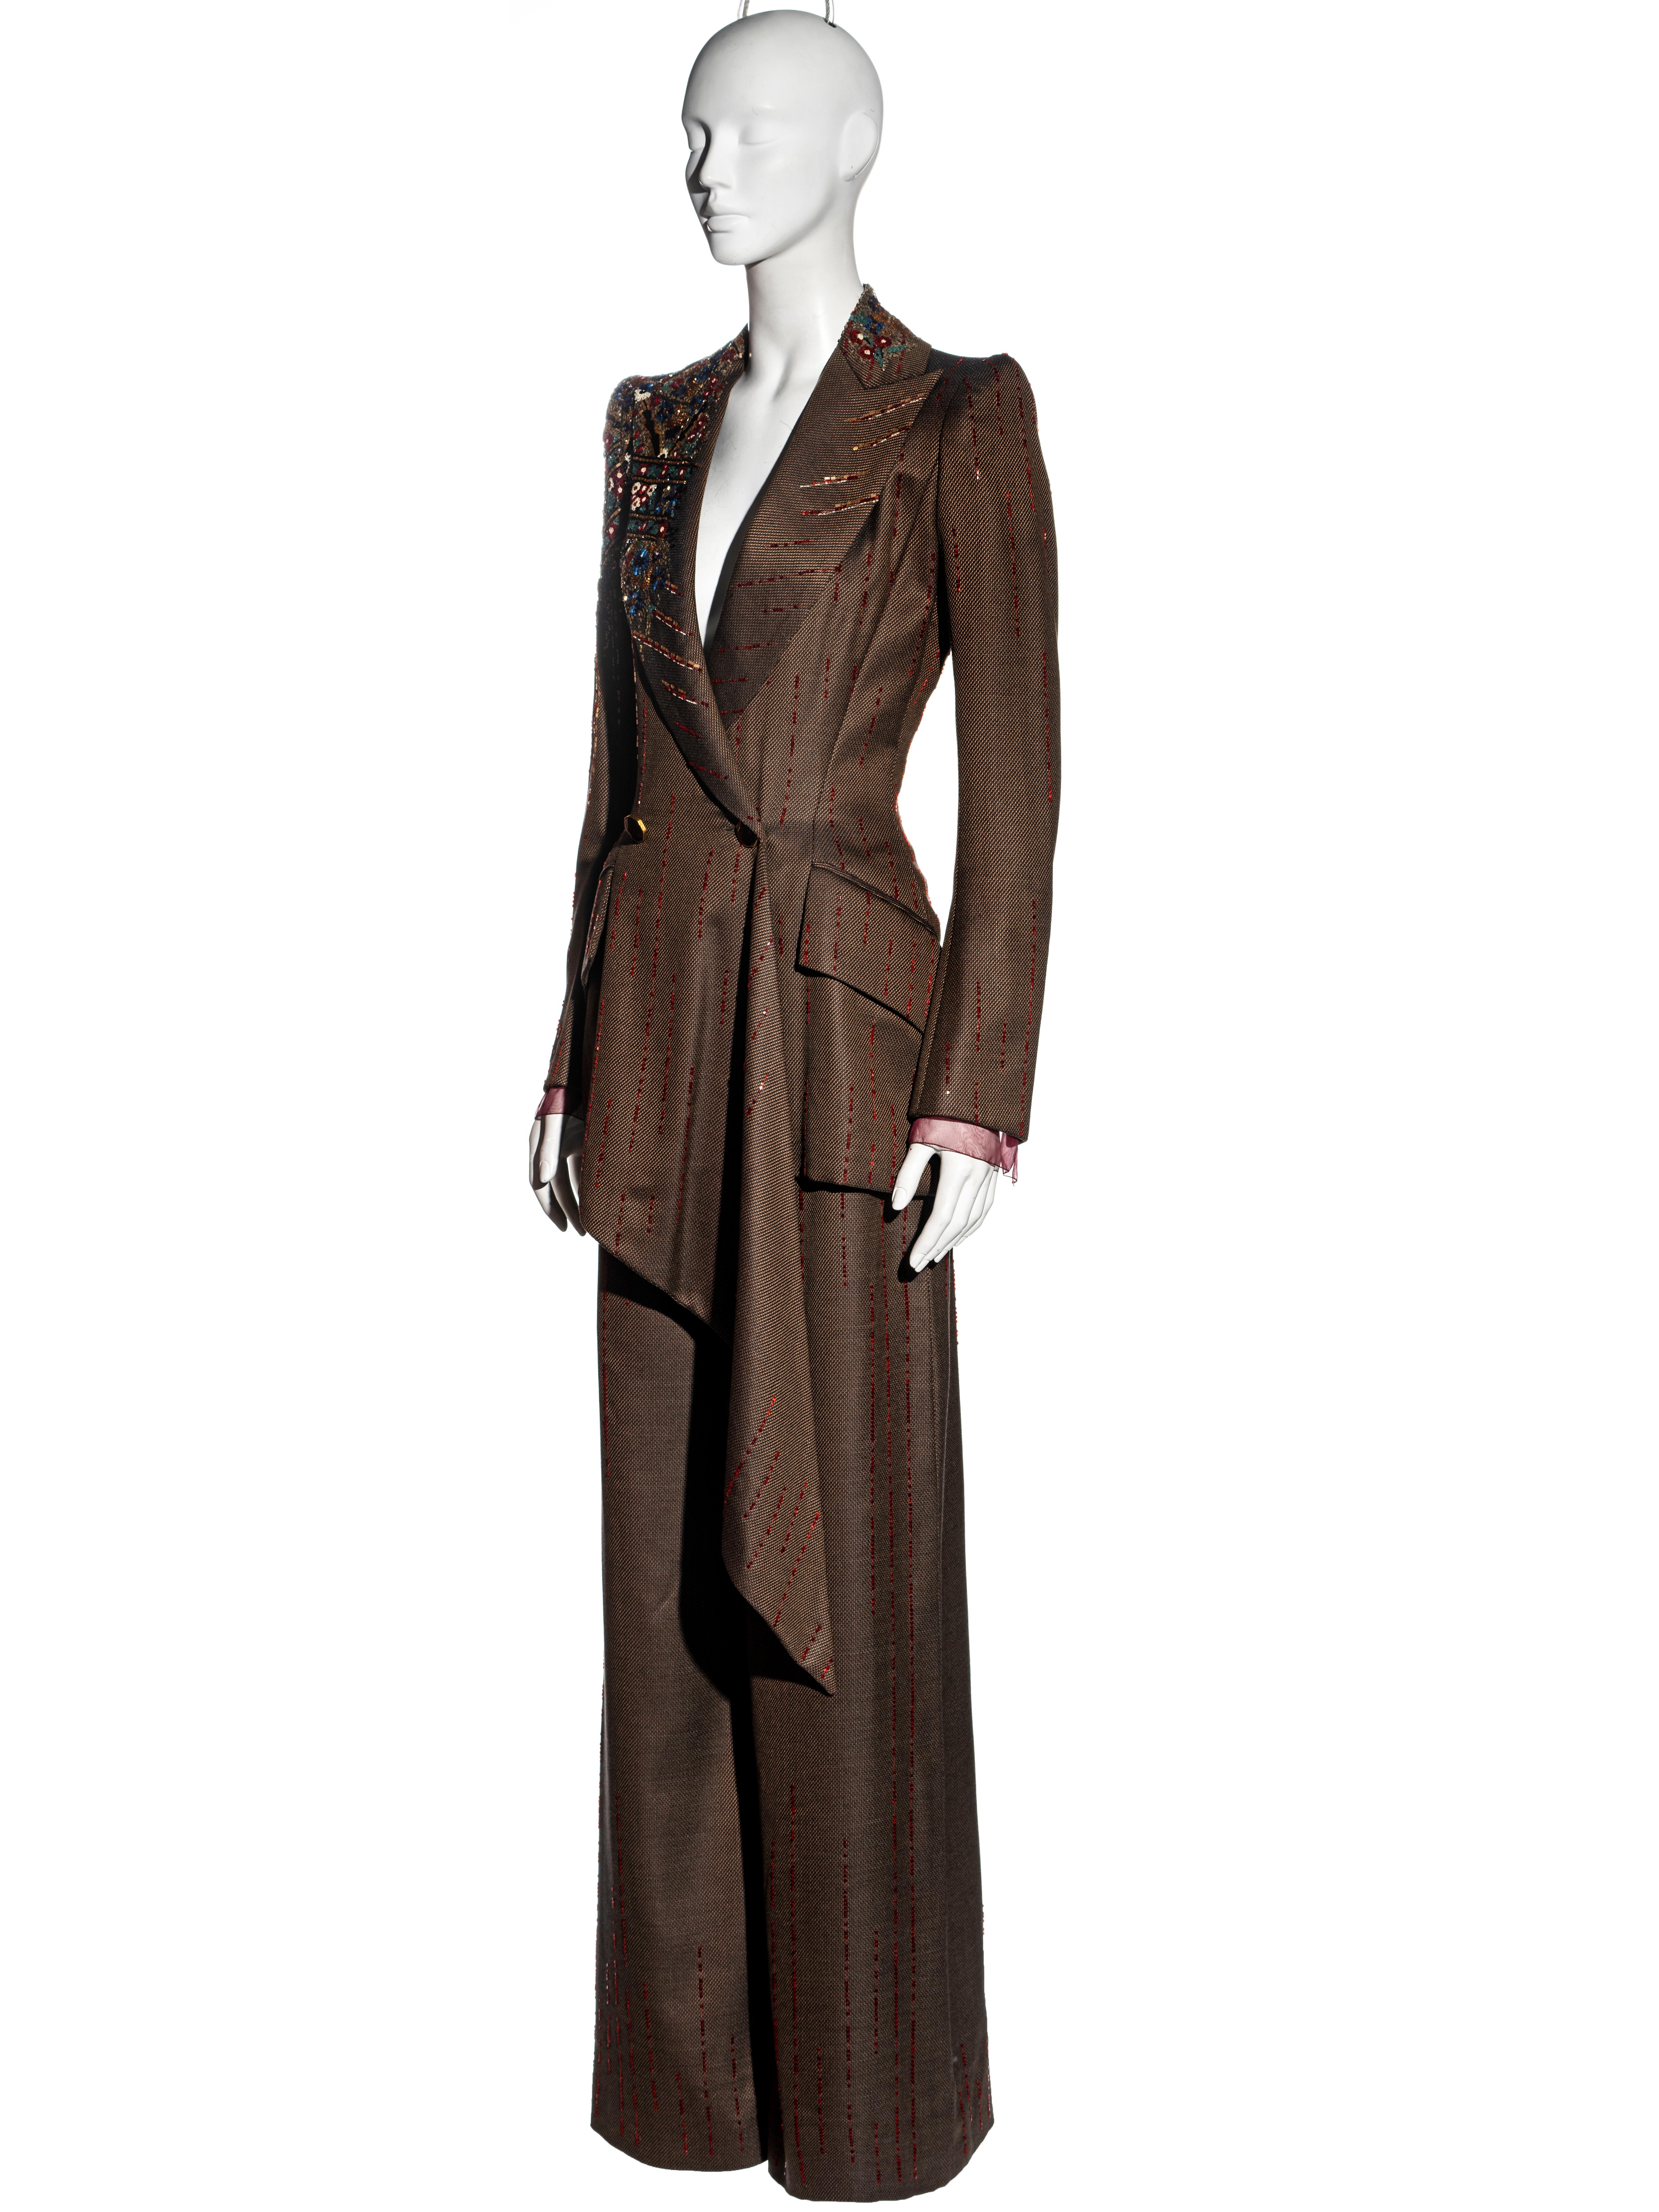 Jean-Louis Scherrer Haute Couture embellished brown wool pant suit, fw 2001 For Sale 2